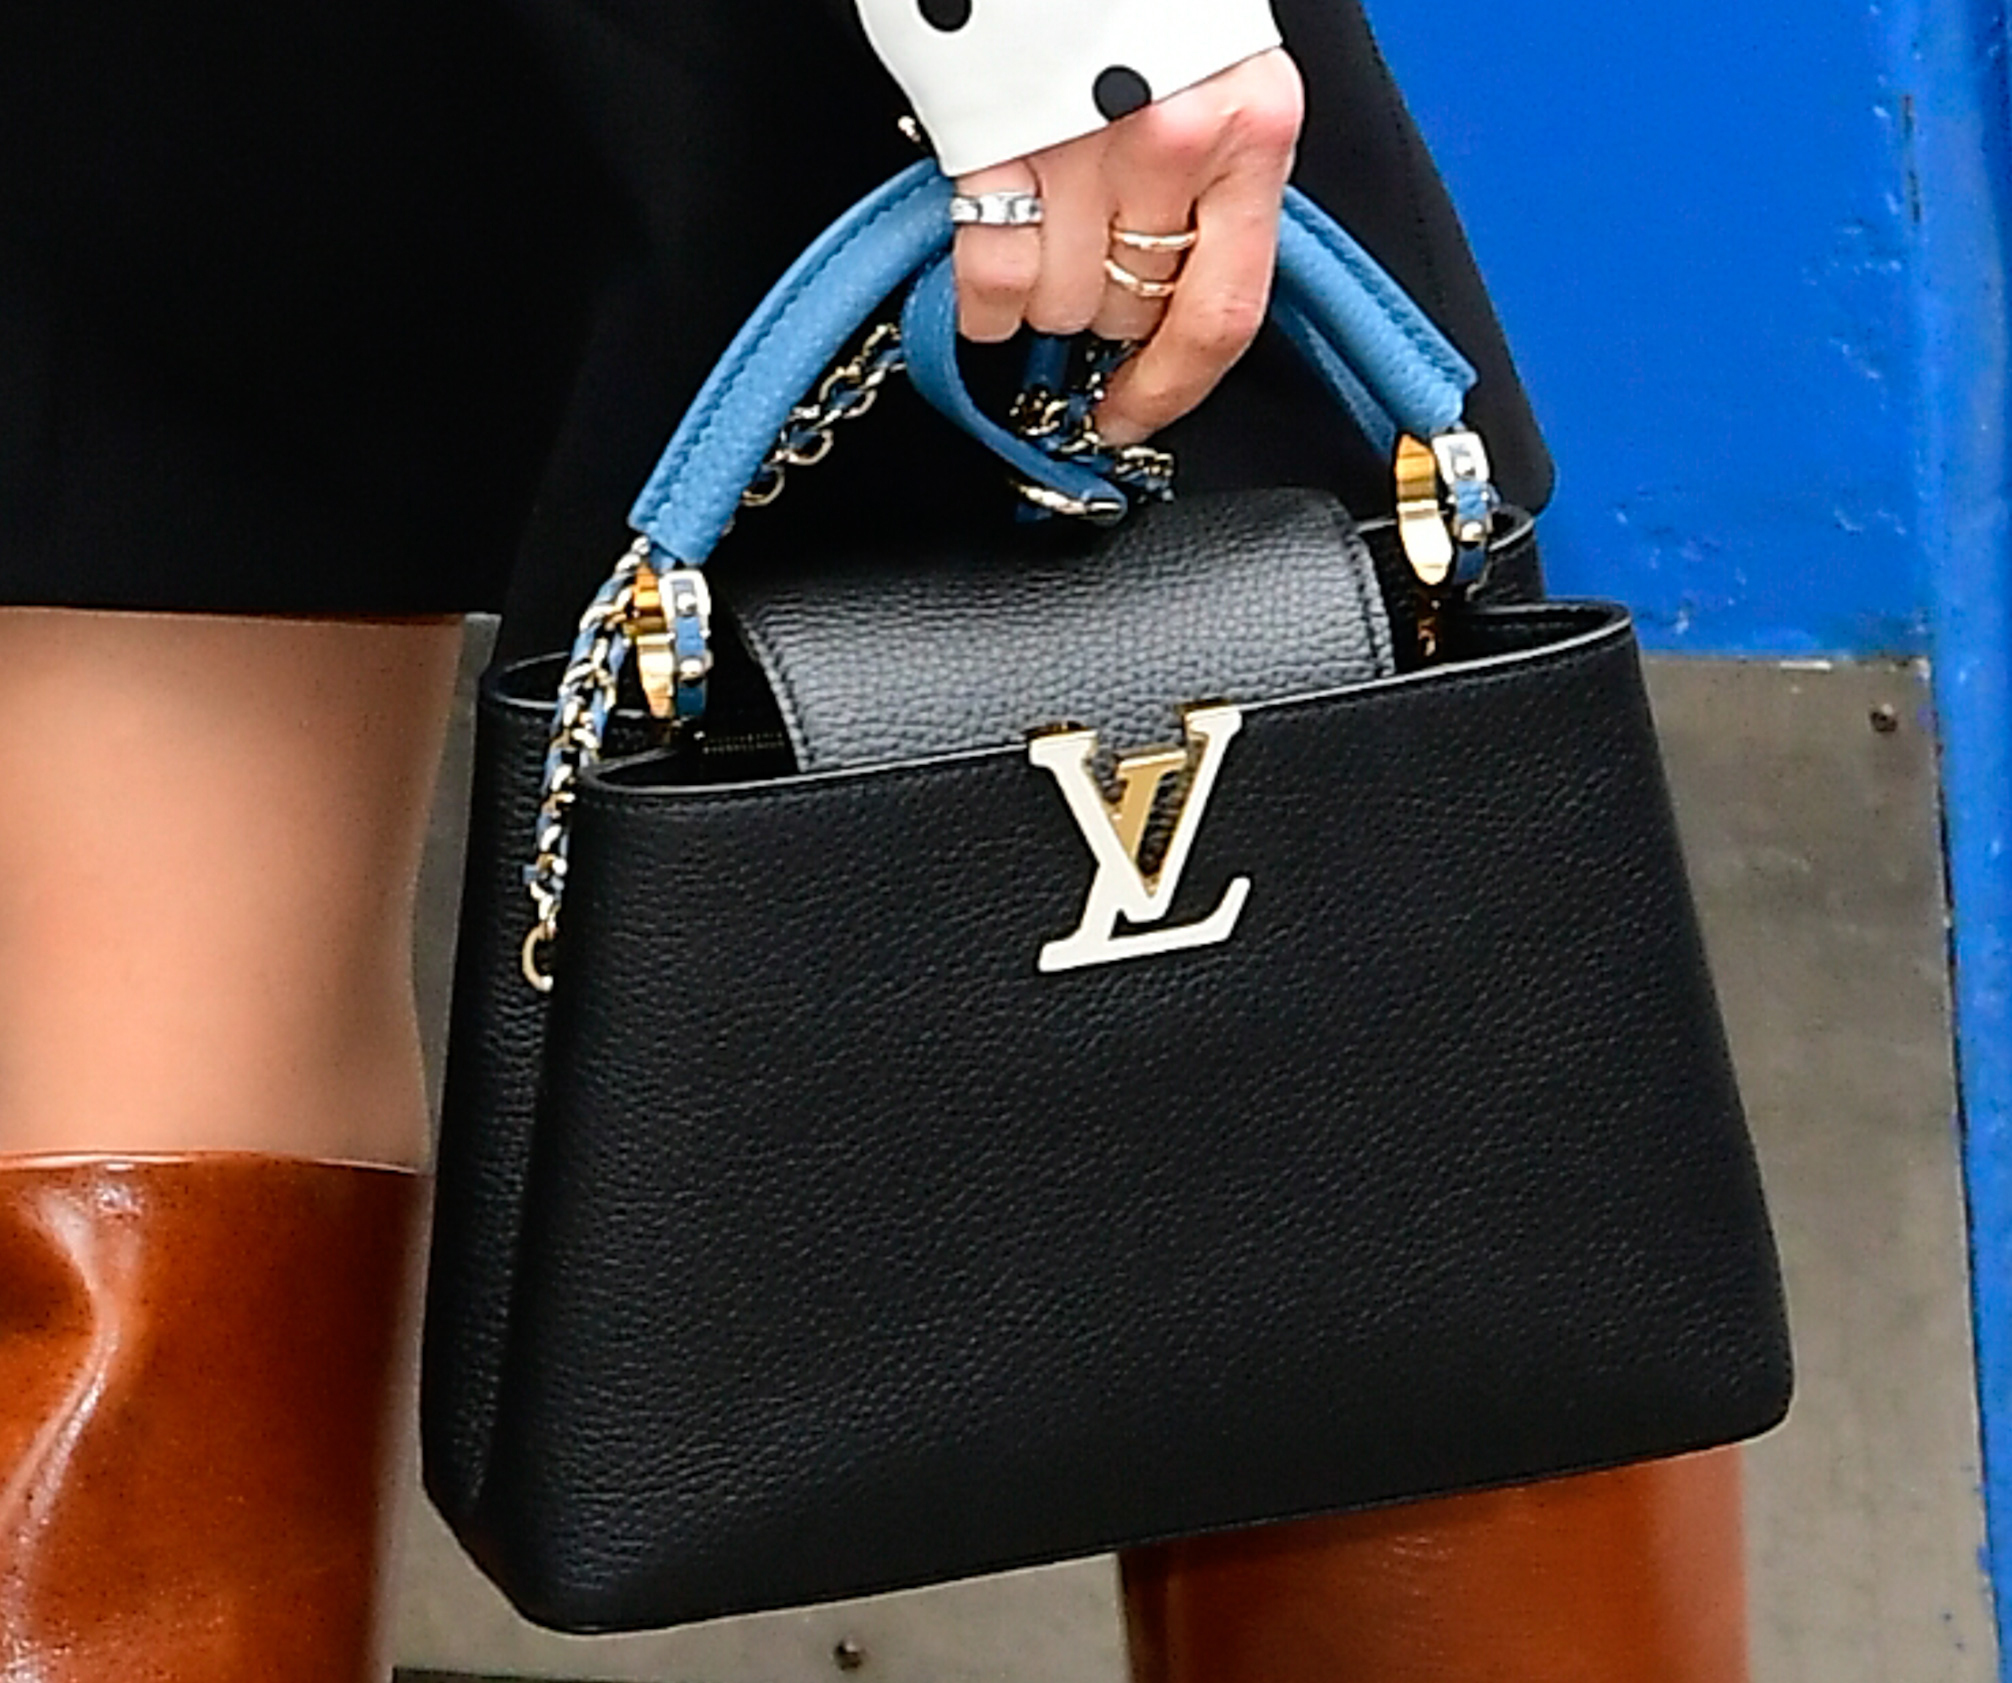 Louis Vuitton and celebrities